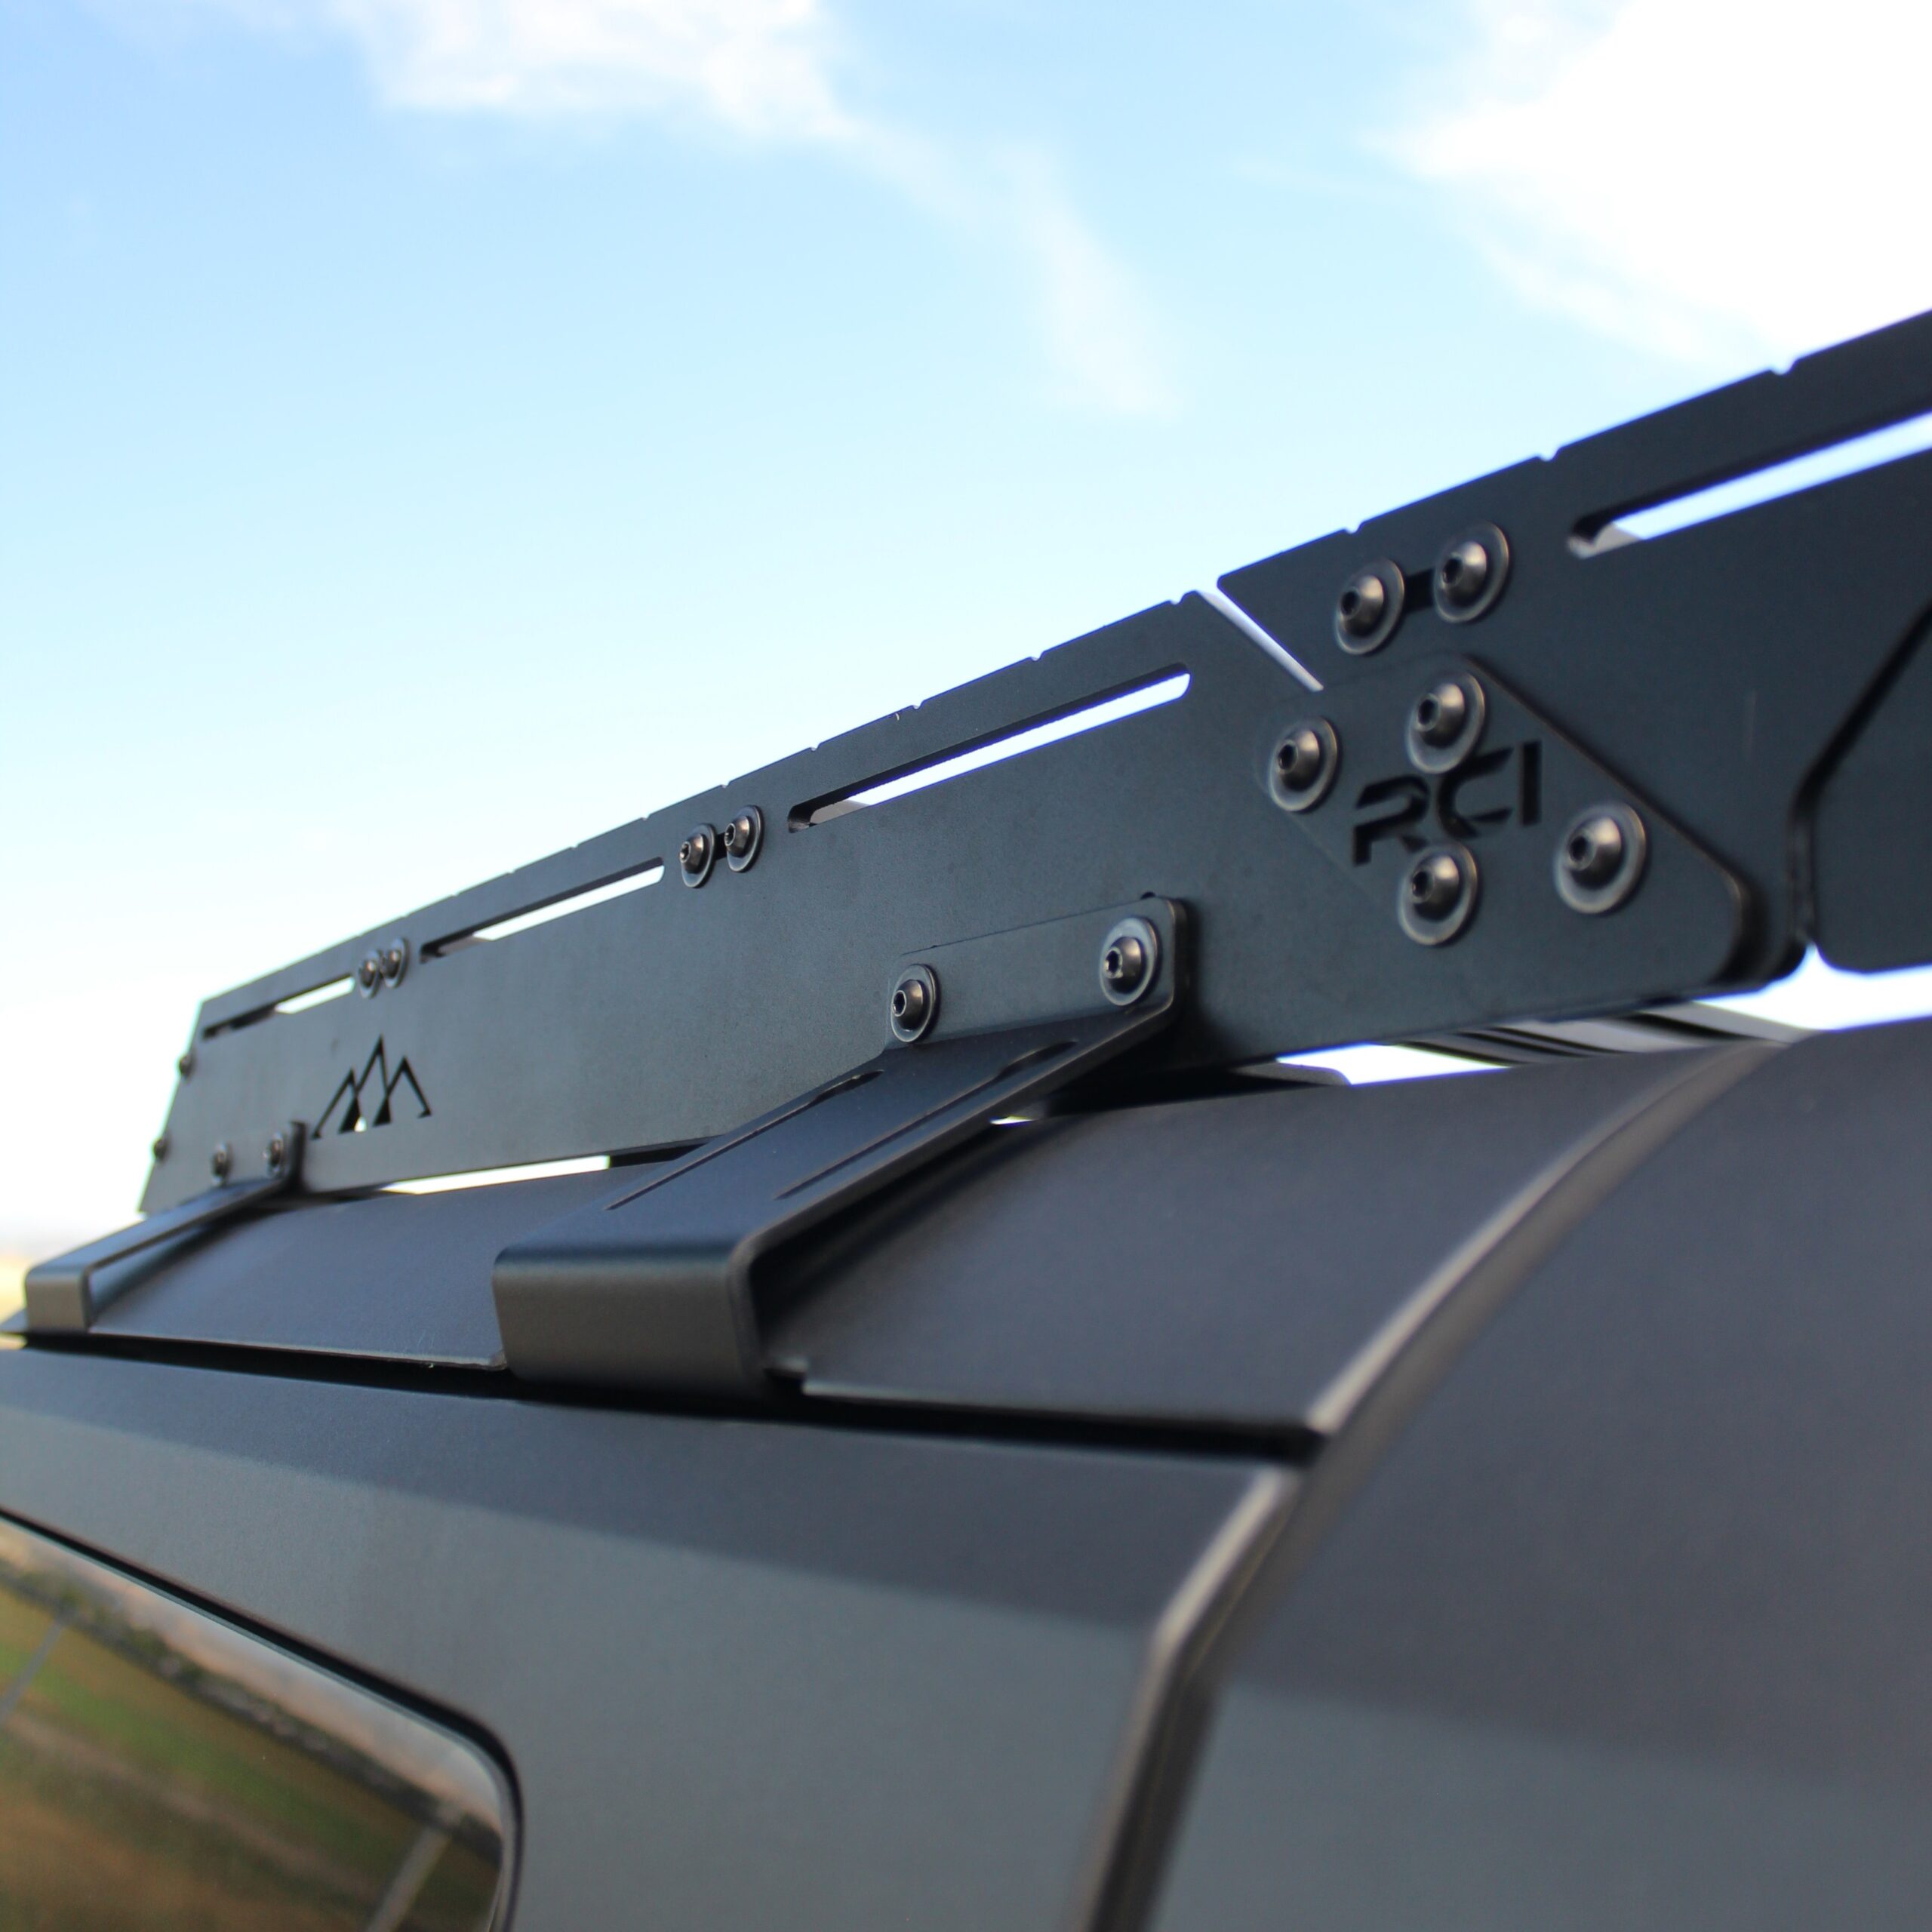 Buy Car Roof Rails with OEM Standards at the Best Price